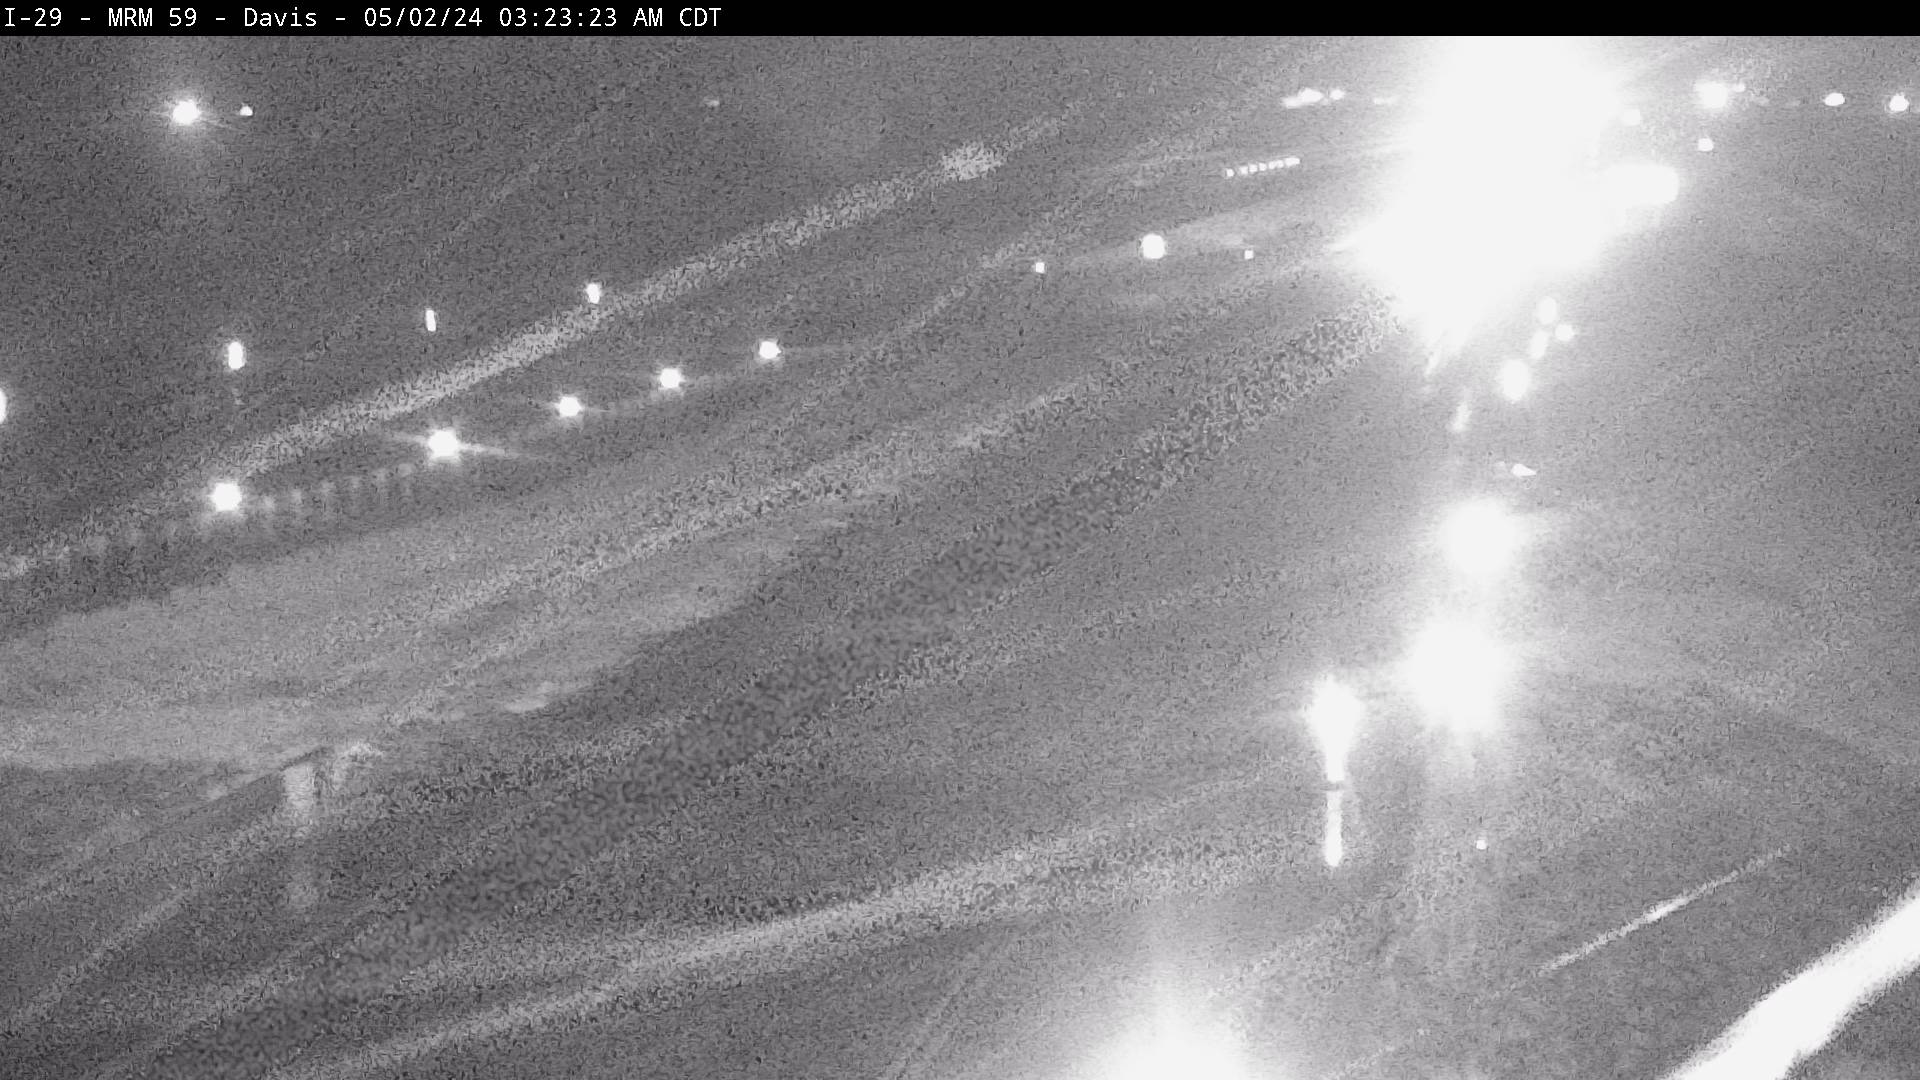 Traffic Cam 10 miles east of town along I-29 @ MM 59 - North Player